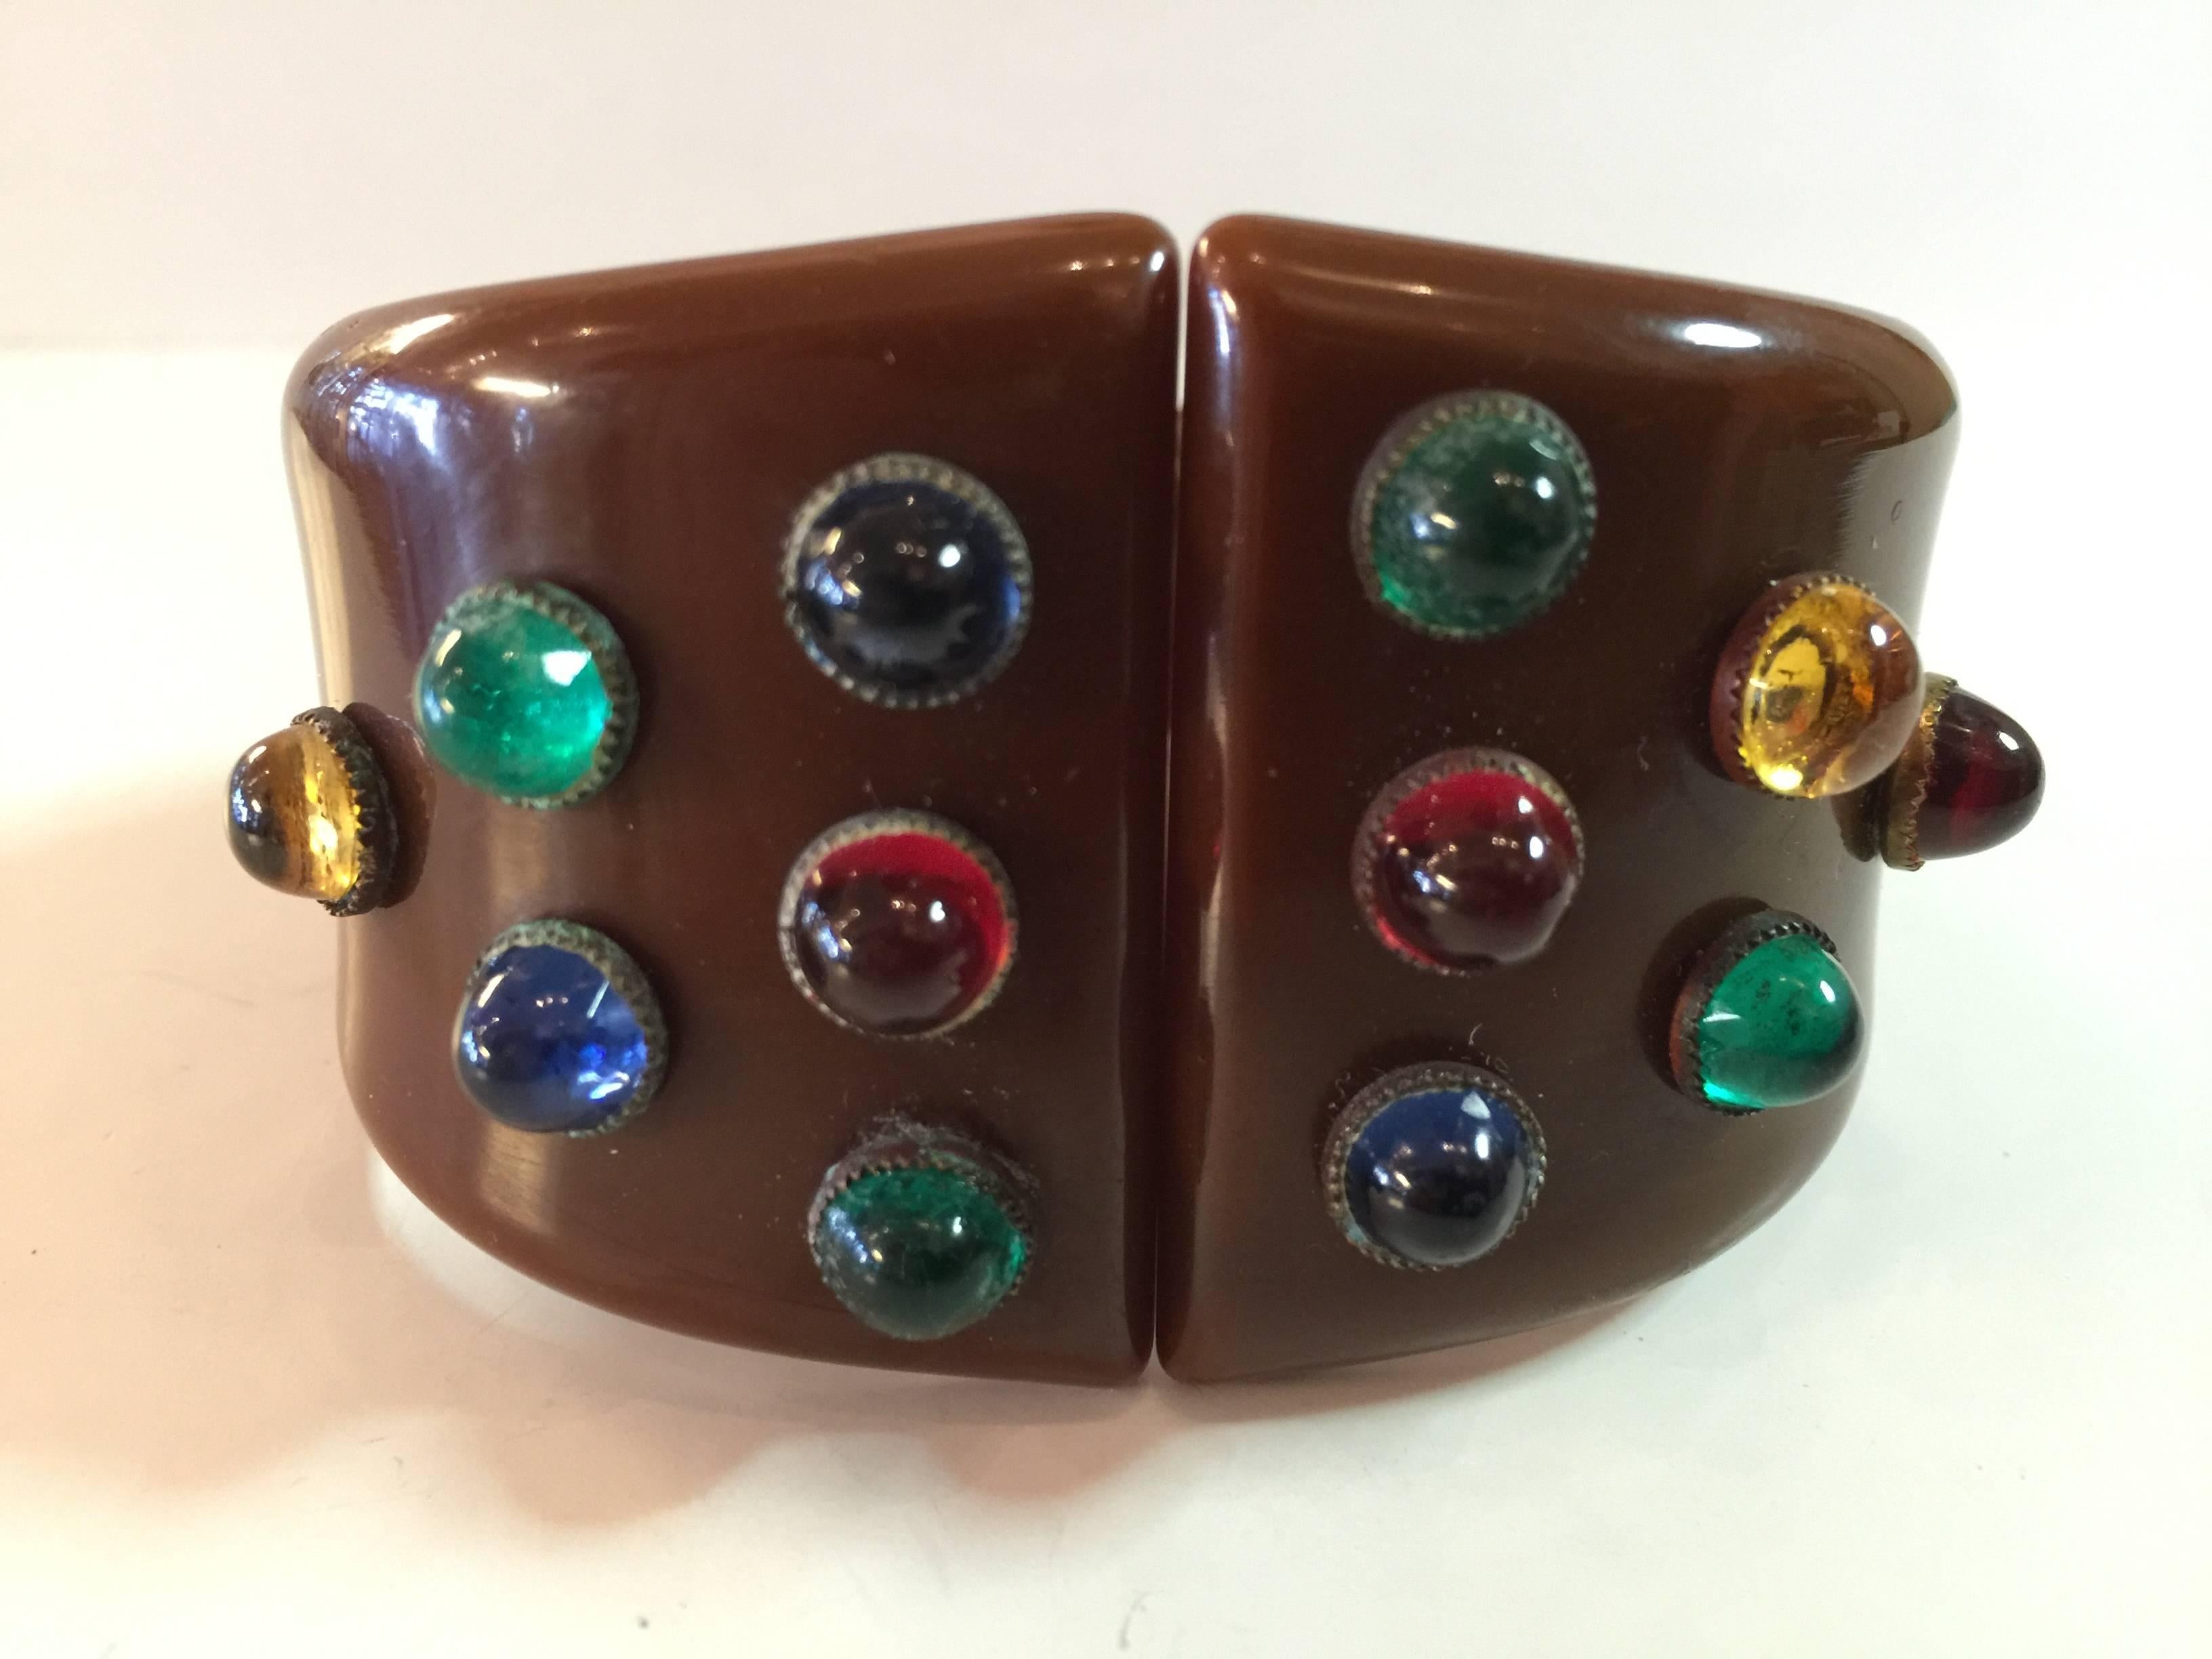 An unusual hybrid of bakelite and classic costume jewelry, this embellished rich brown bakelite hinged bracelet oozes sophistication and wearability. 12 Bezel set gemtone cabochons encrust the bracelet, a center open spring hinge mechanism variety